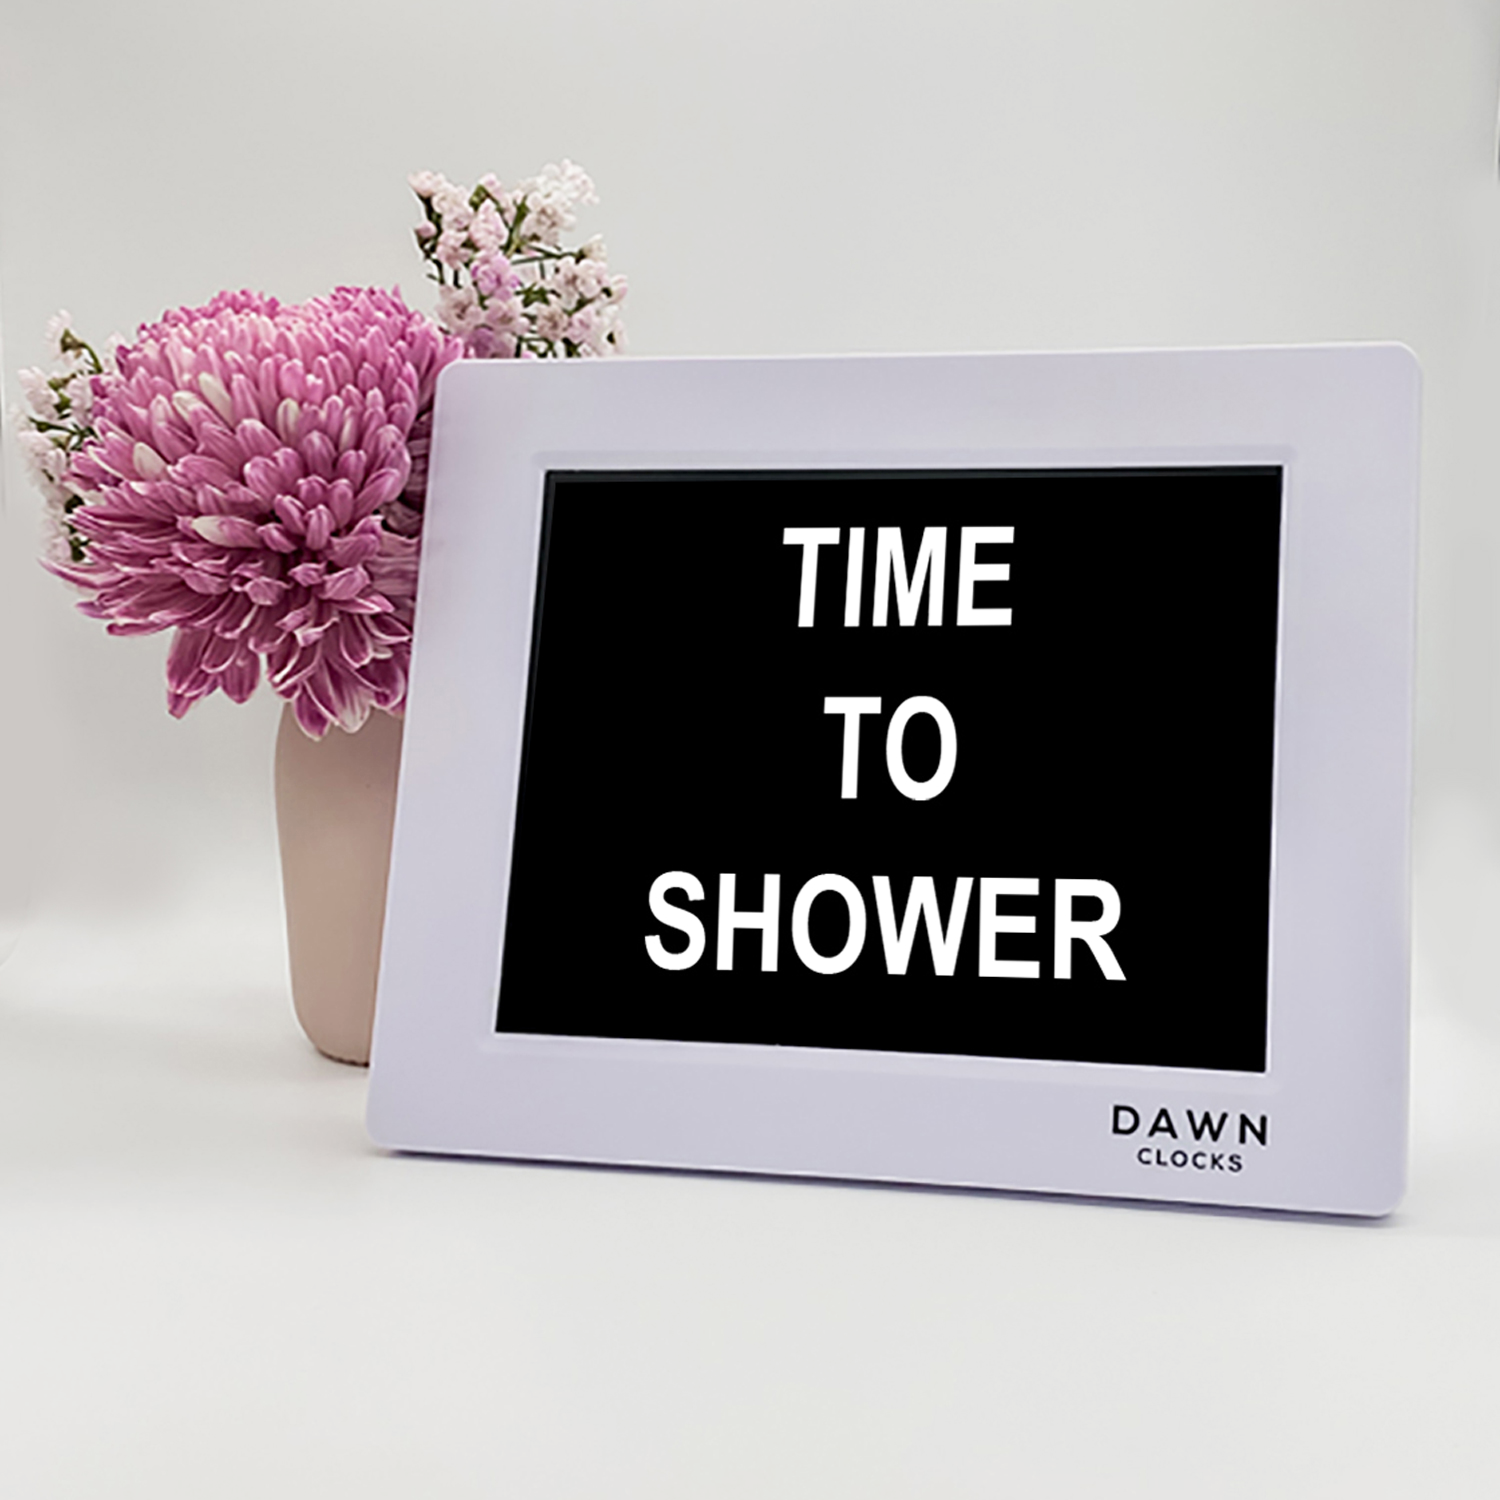 Original Dawn Clock shown on a table with the "Time to shower" reminder on the screen. This is ideal for all ages and proved essential for NDIS participants, people living with Dementia, people living with a disability and seniors.